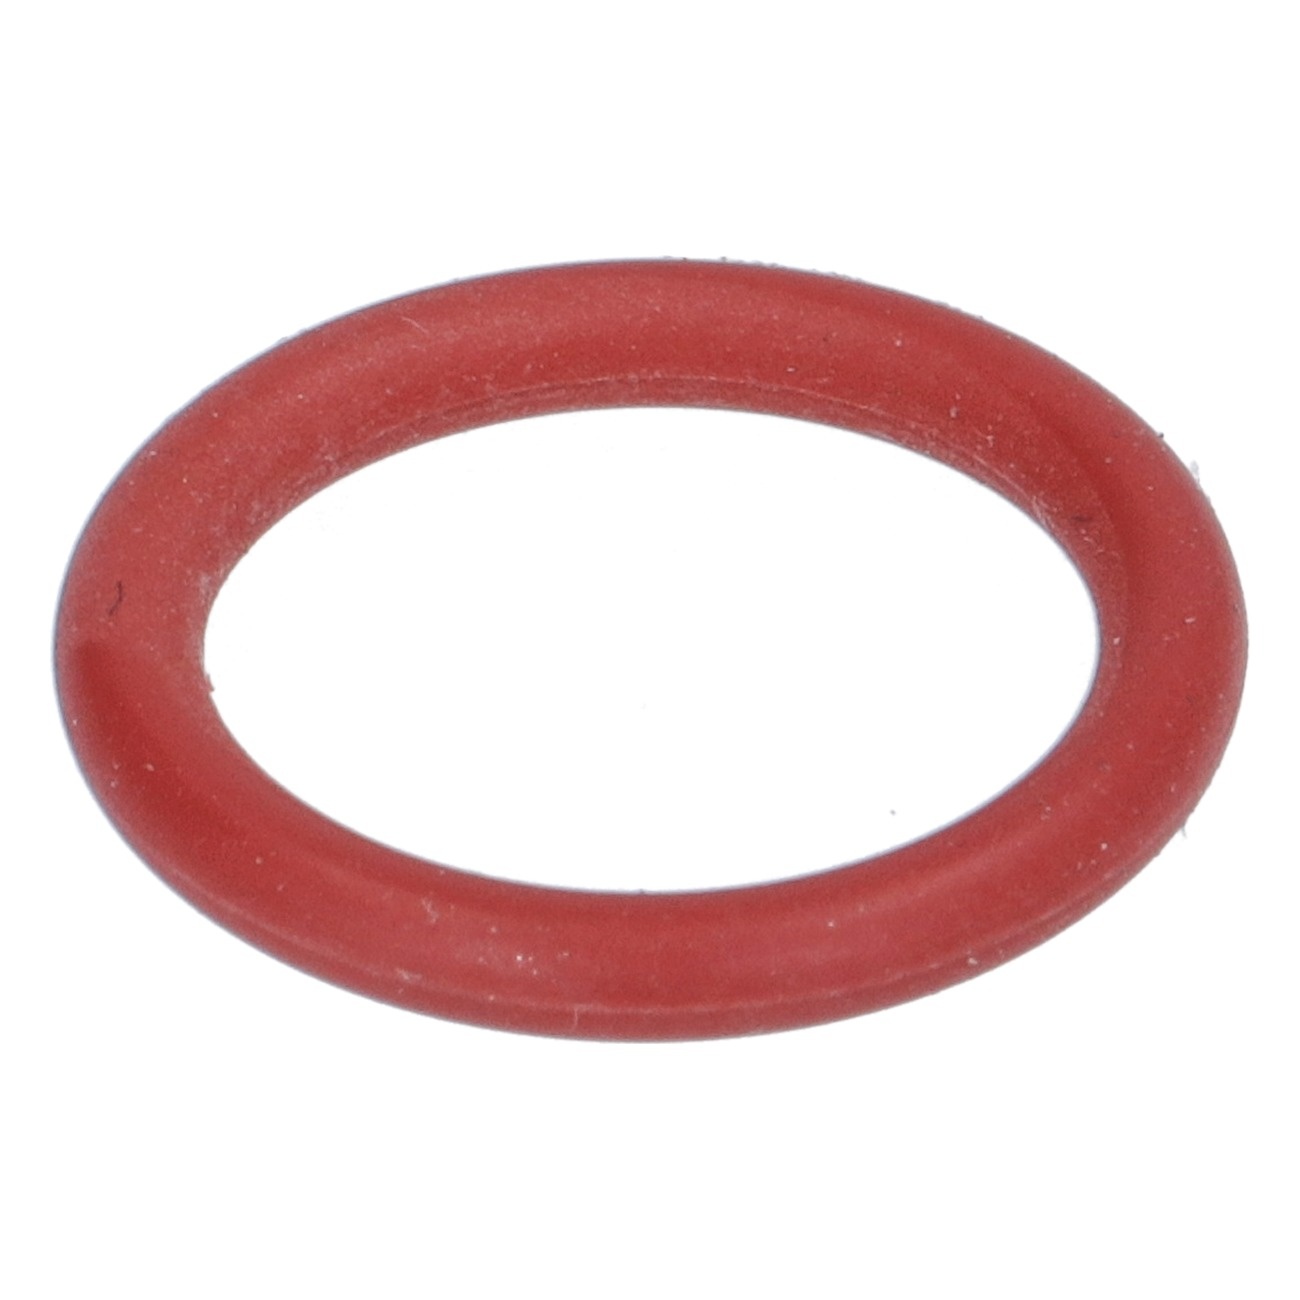 ORM GASKET ø2x12 MM RED SILICON